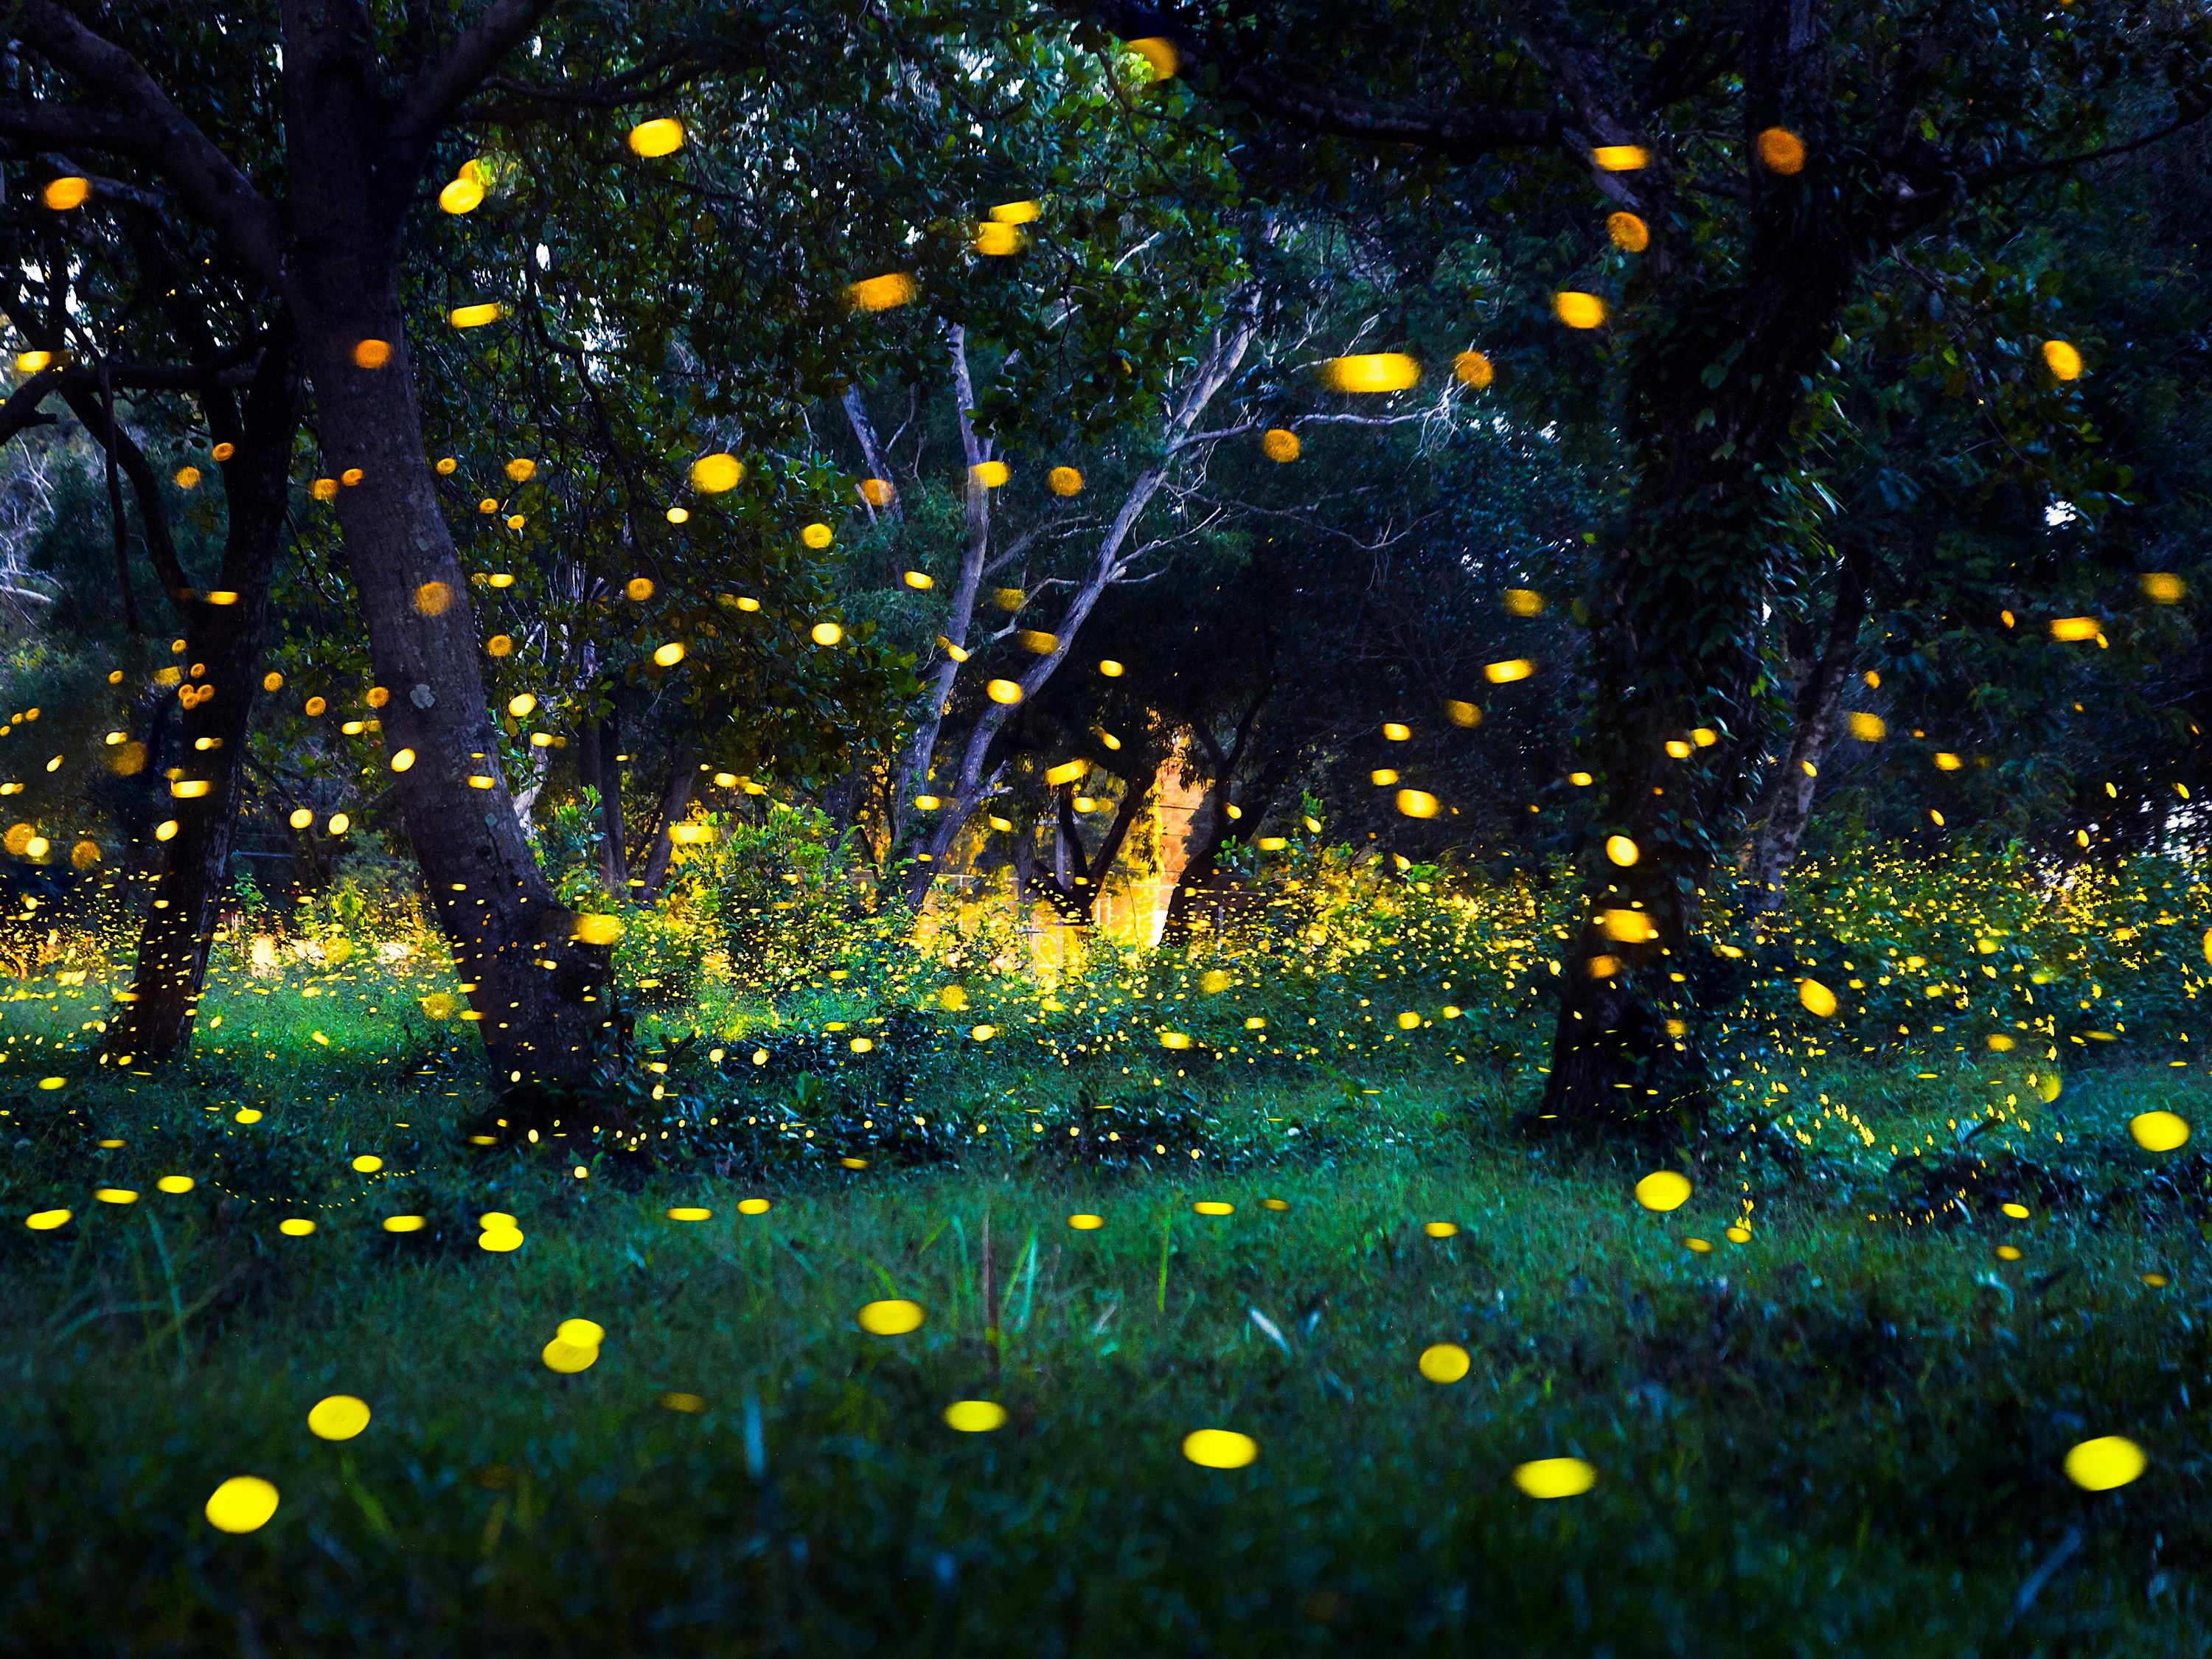 Congaree National Park Hosts Firefly Event With Lottery to Attend